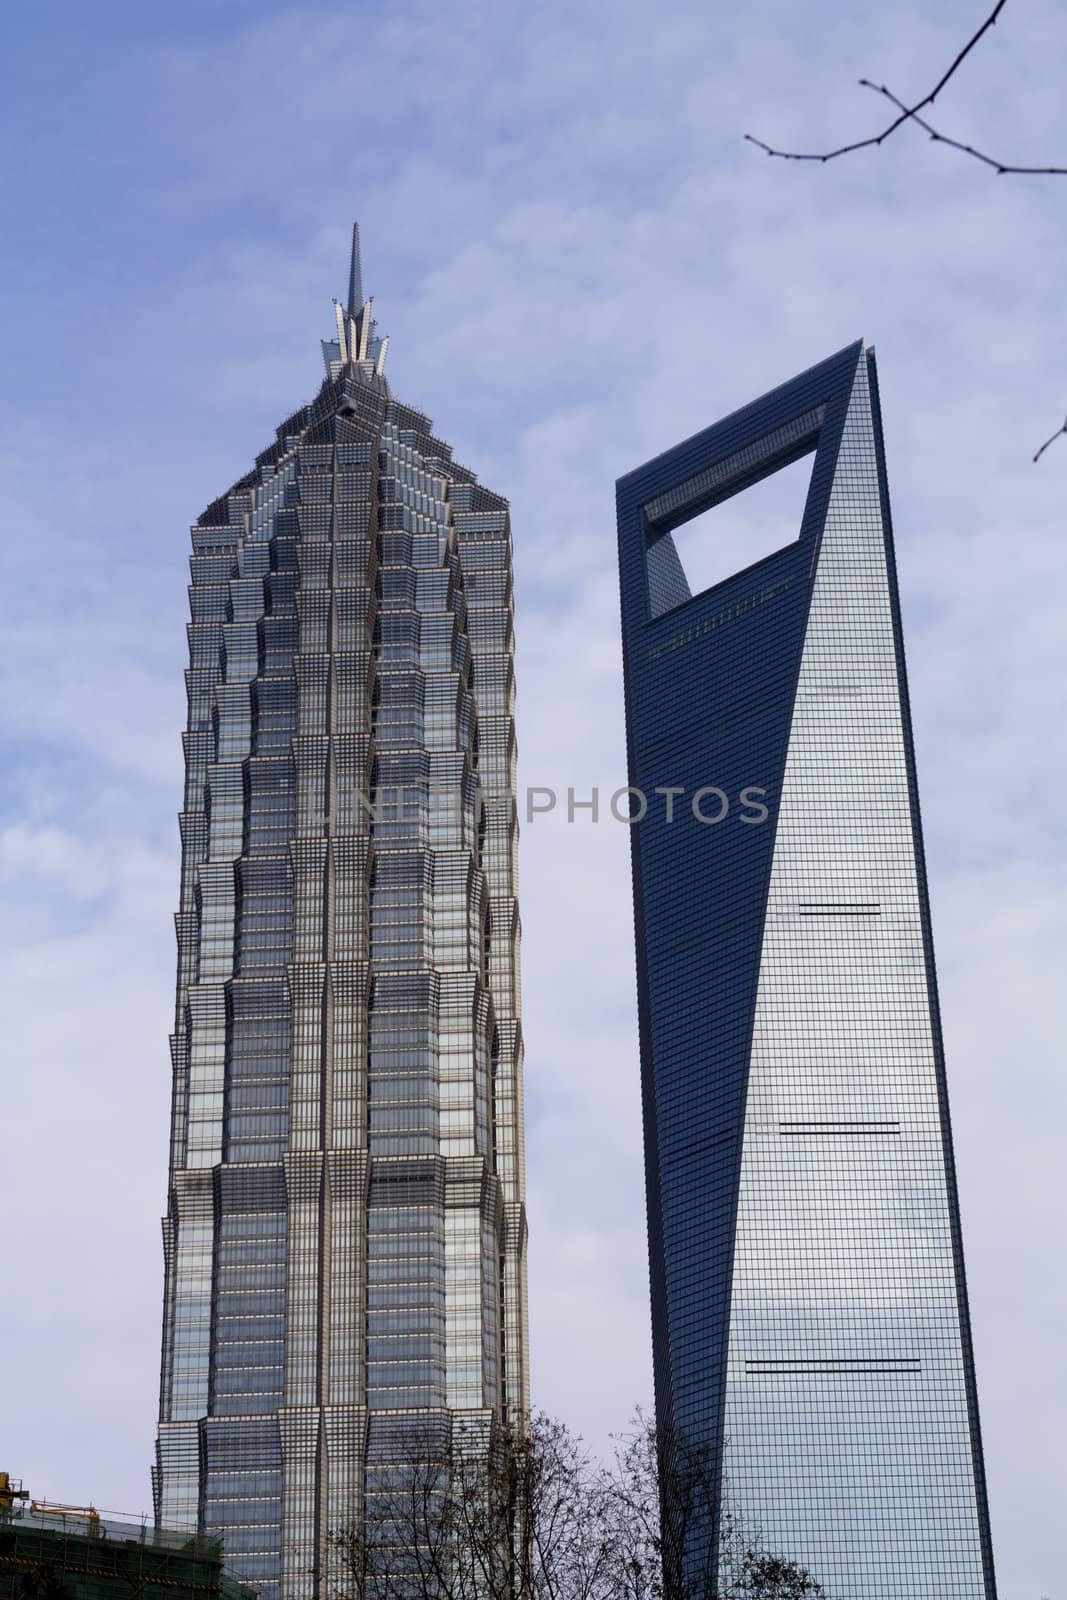 shanghai Architecture jinmao tower by jal300